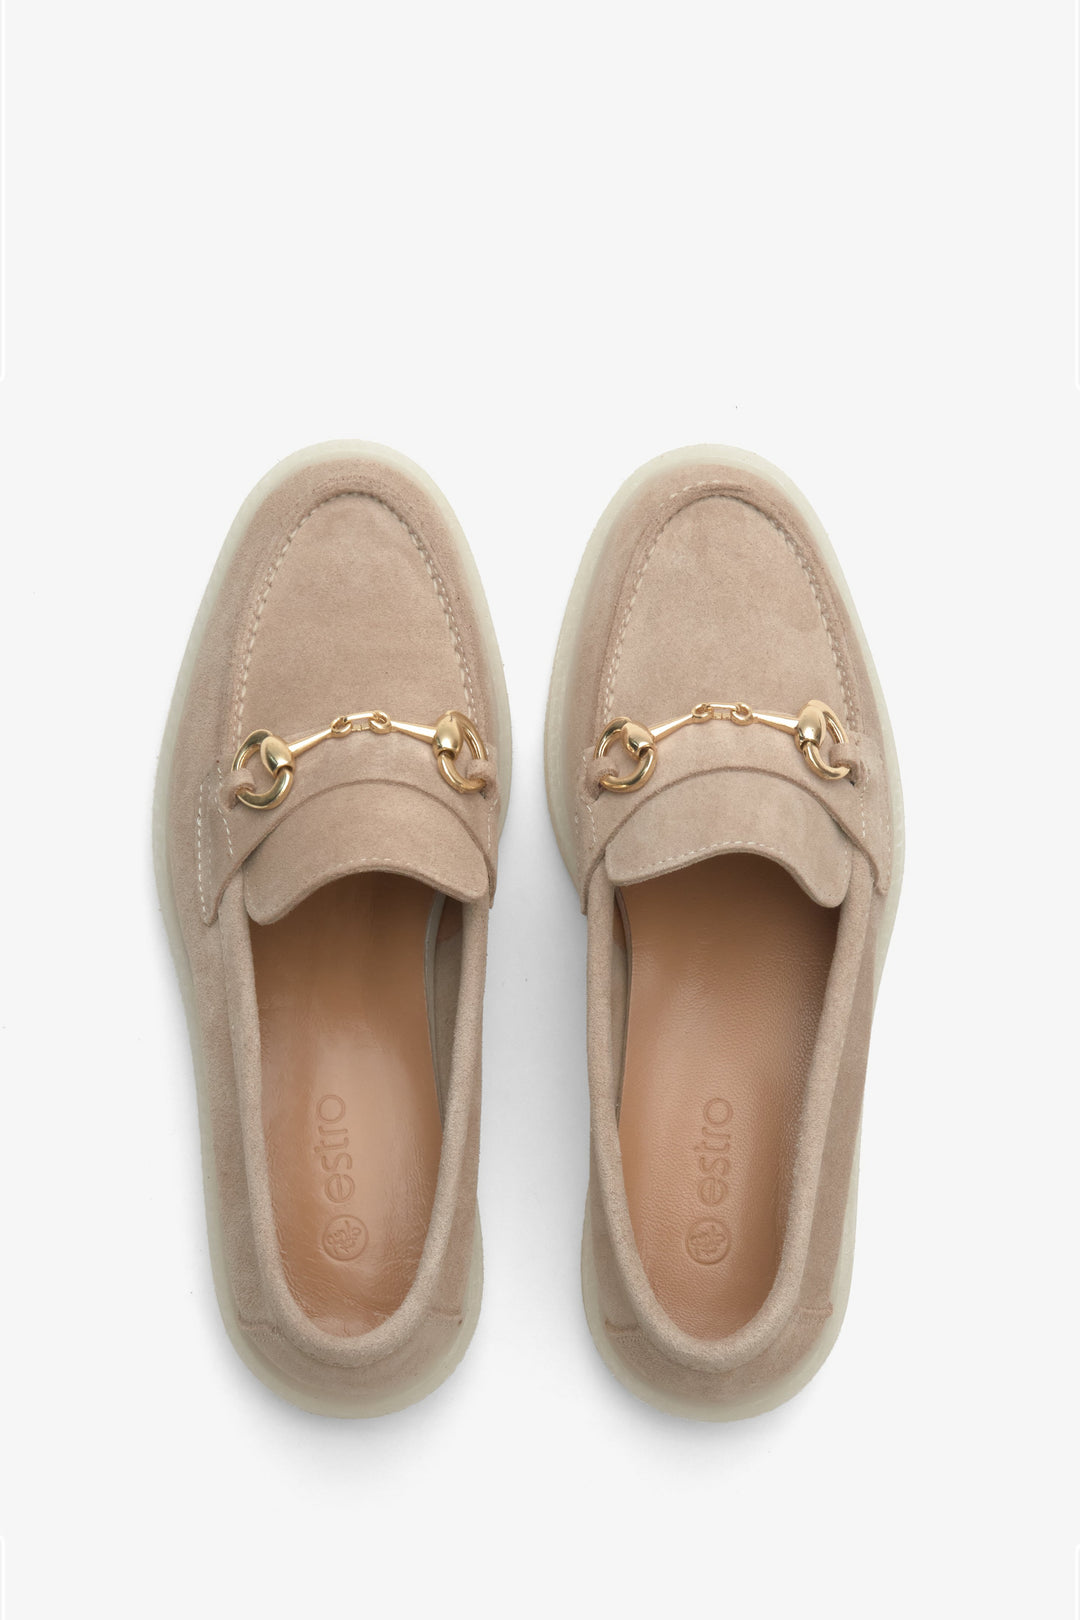 Beige women's loafers made of velour and leather by Estro